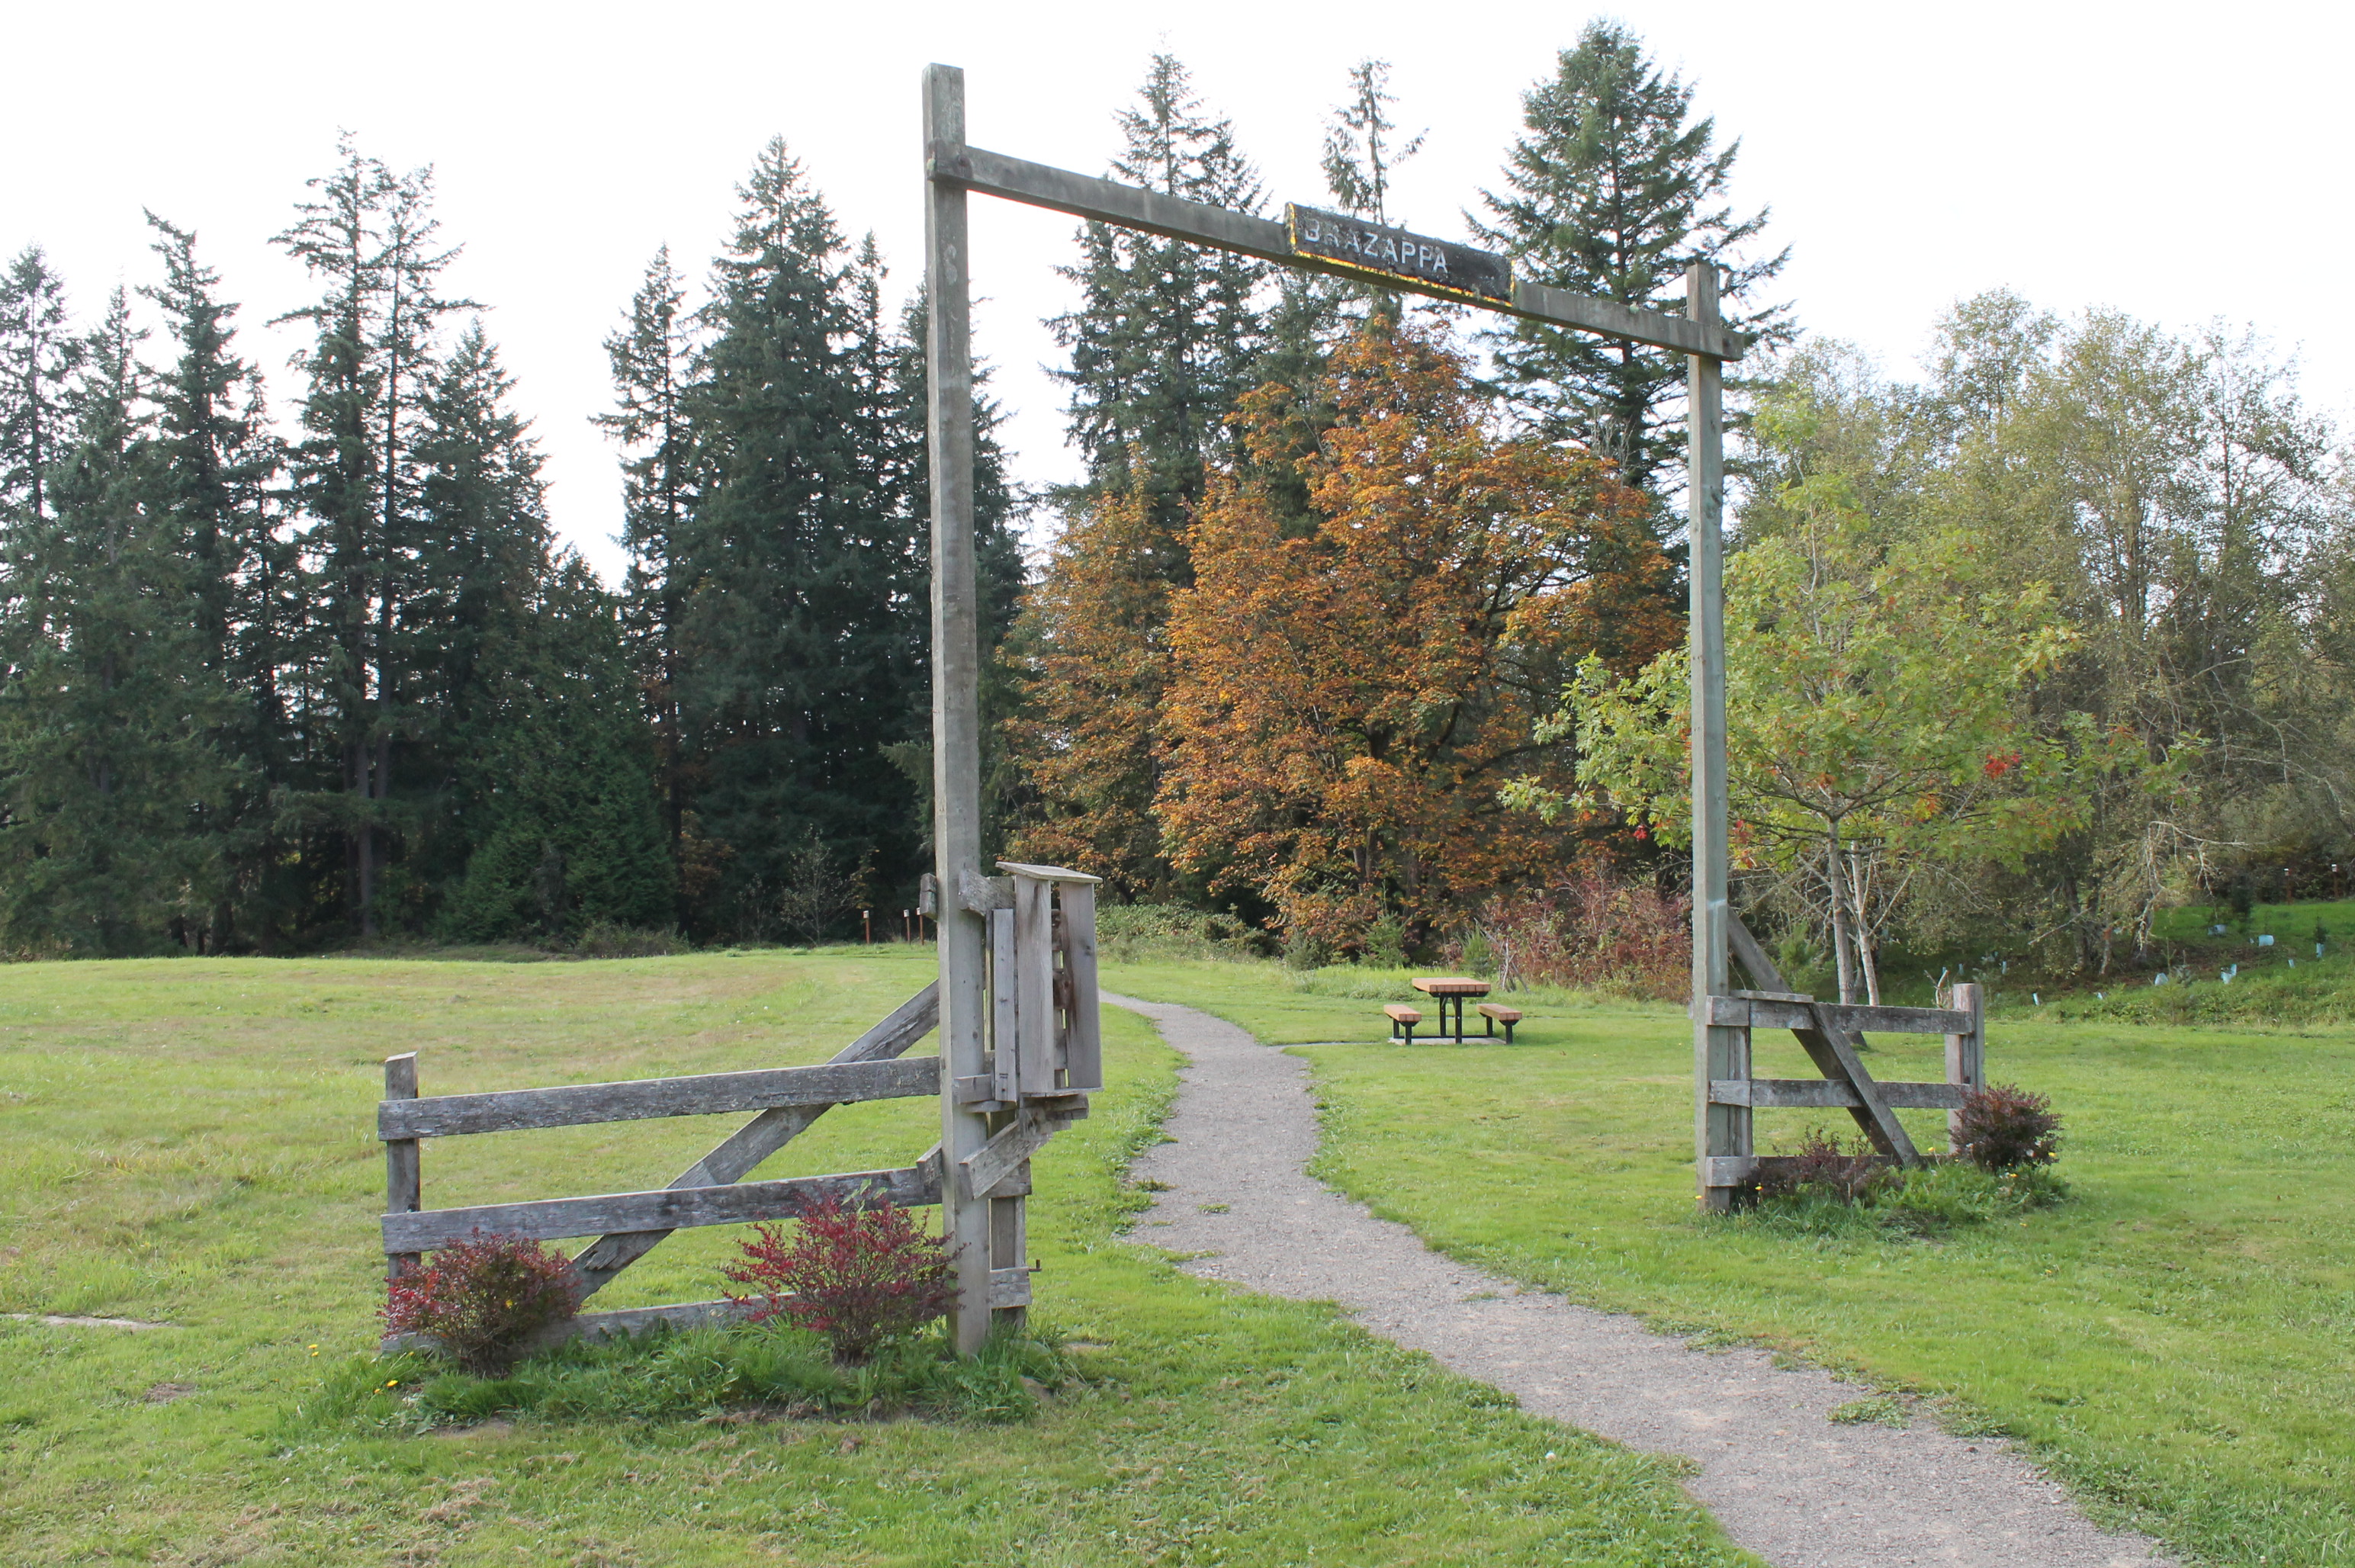 evans creek preserve entrance, grassy fields bordered by trees, a lone picnic table sits in the foreground